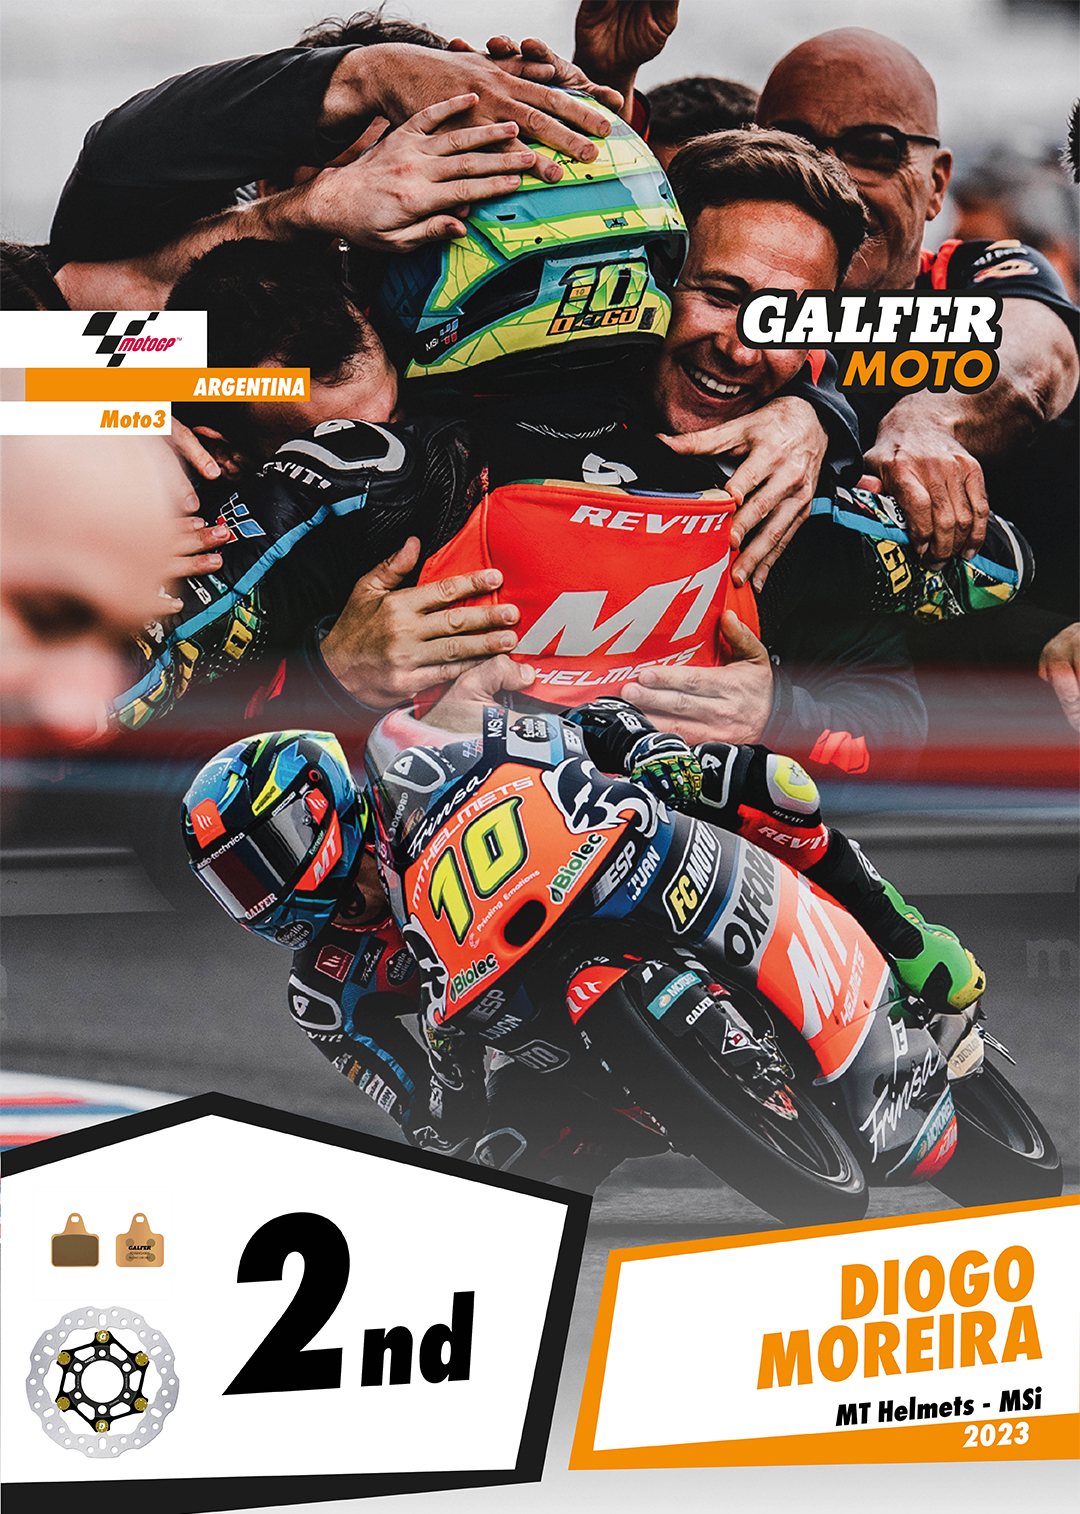 ONE-TWO FINISH IN MOTO3 FOR GALFER RIDERS IN ARGENTINA￼ - Galfer Moto